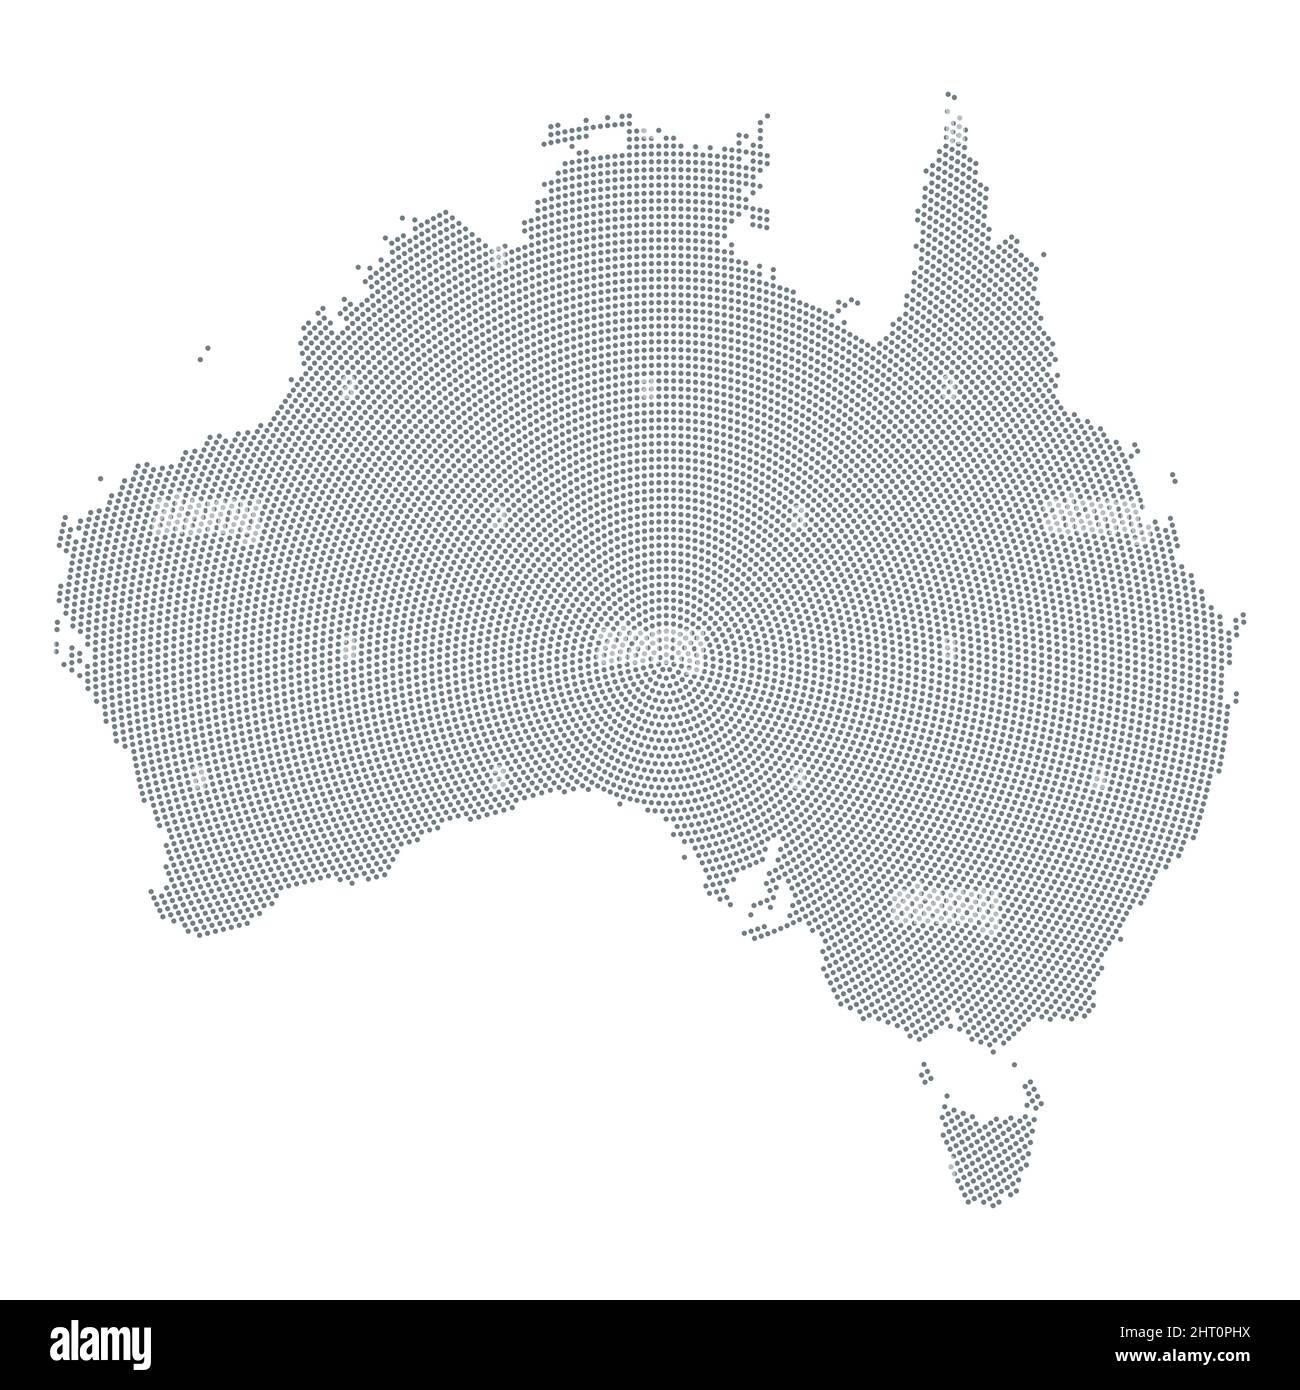 Australia map, radial dot pattern. Gray dots going from Tallaringa Conservation Park, South Australia, outwards, forming the silhouette of the country. Stock Photo